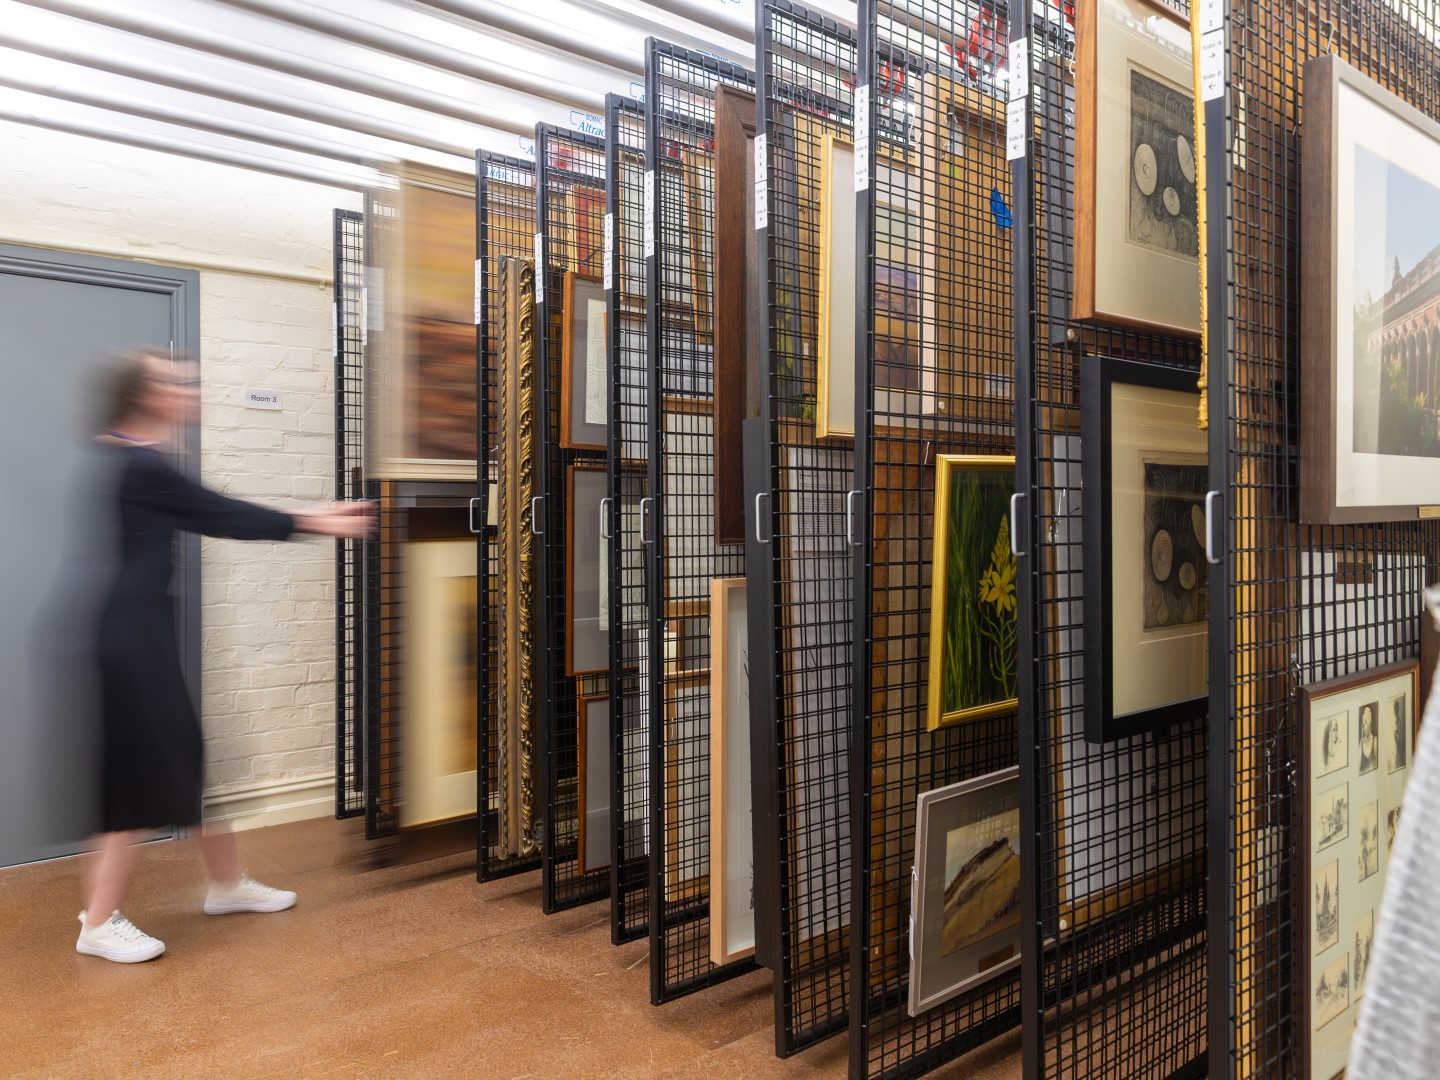 sliding racks filled with artwork from the Town Hall Gallery collection